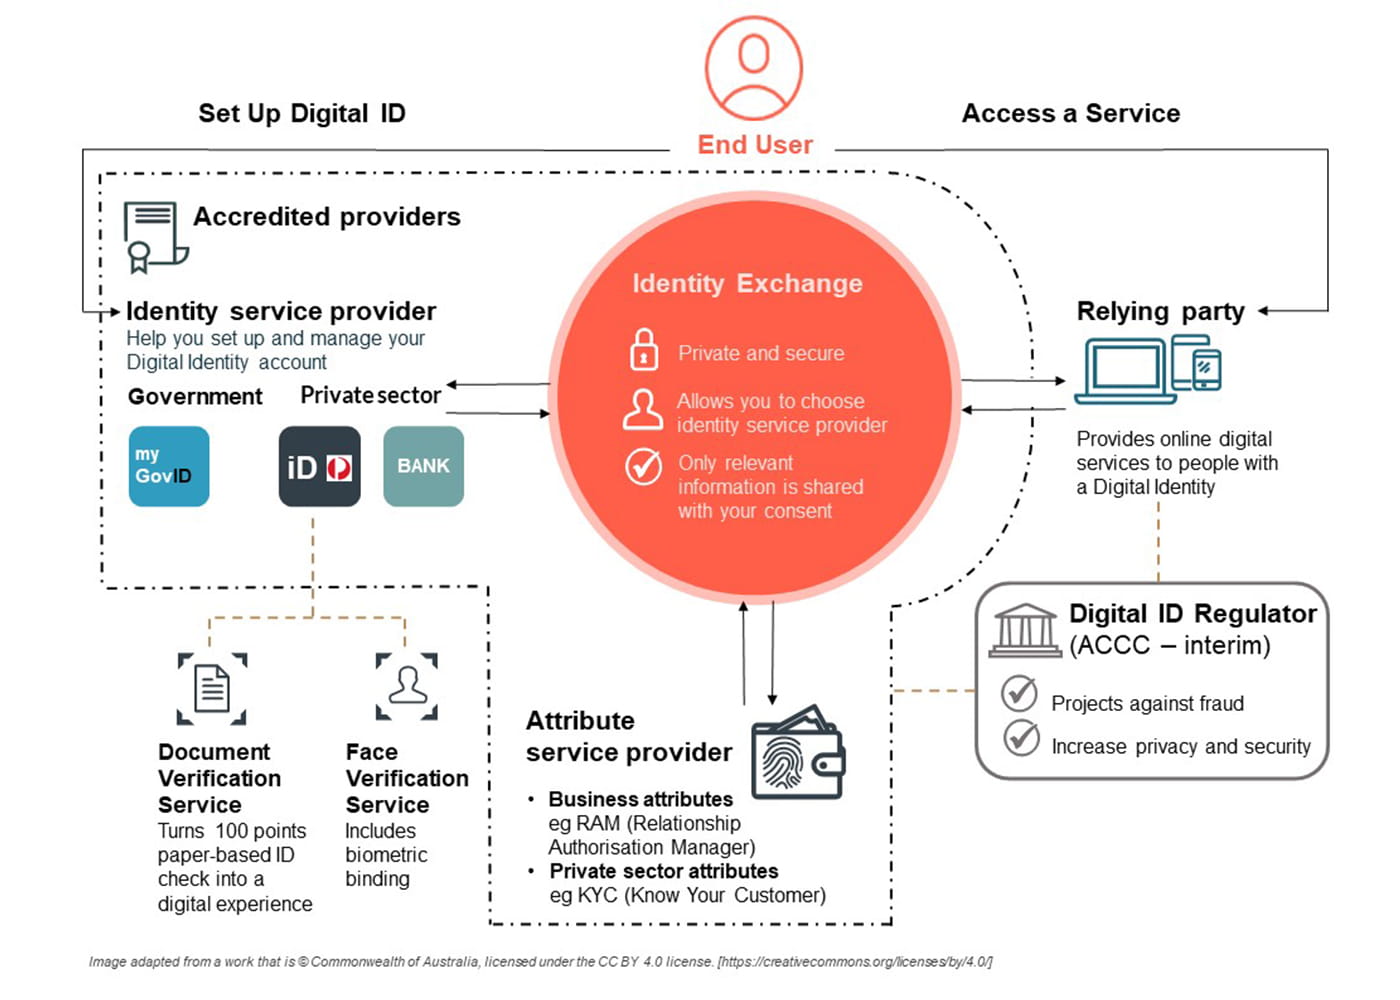 Diagram showing setting up digital identity and exchange process in Australia